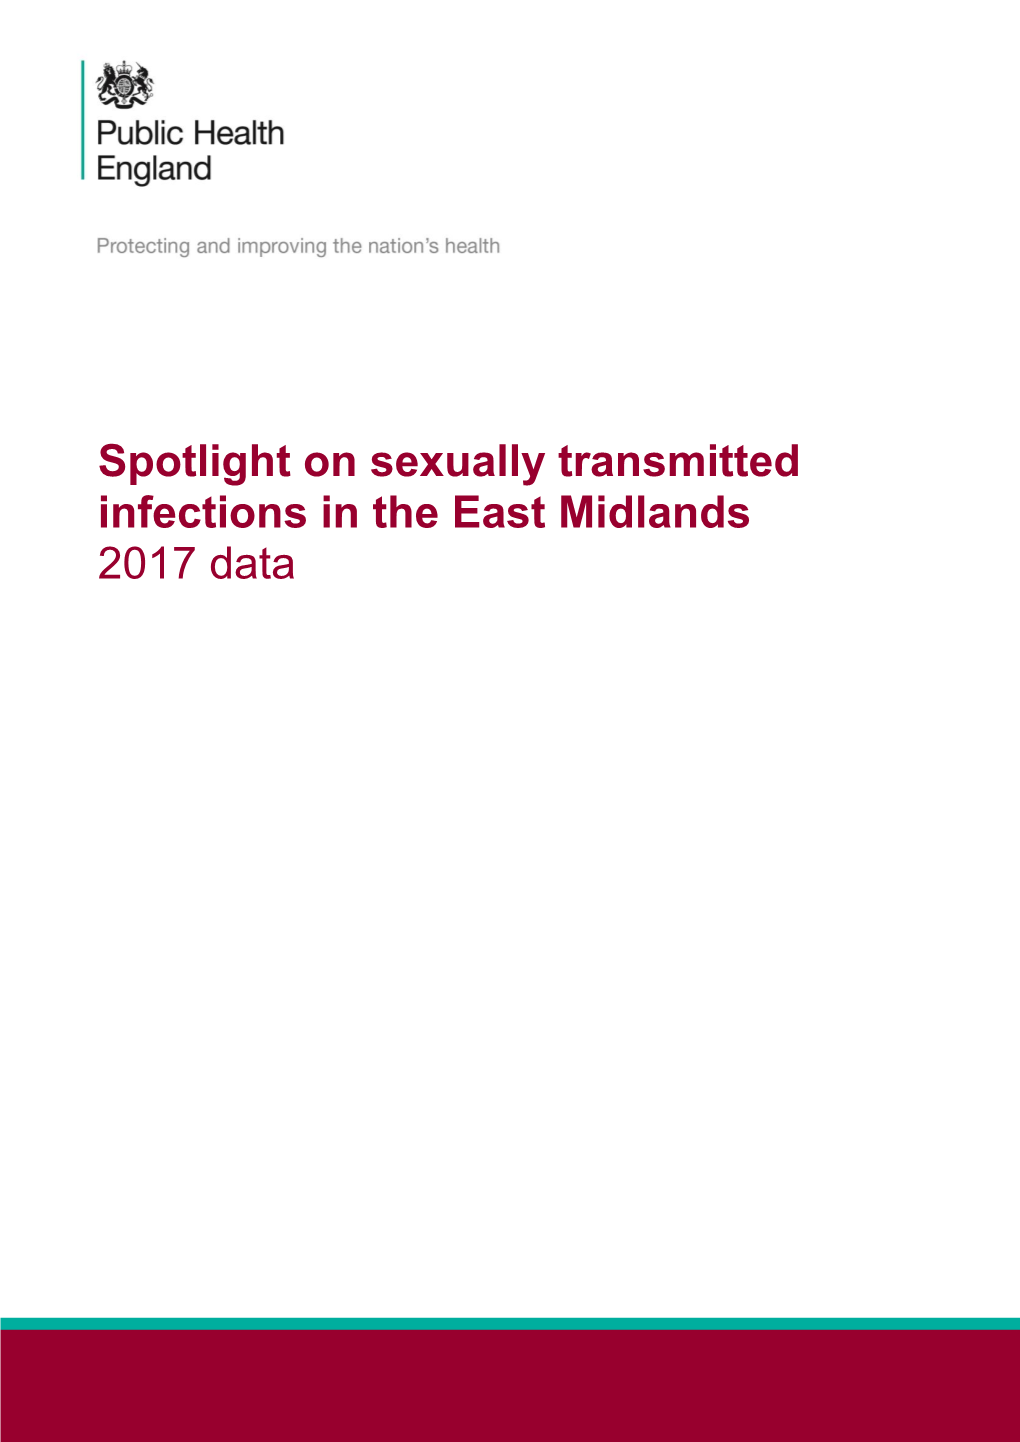 Spotlight on Sexually Transmitted Infections in the East Midlands 2017 Data